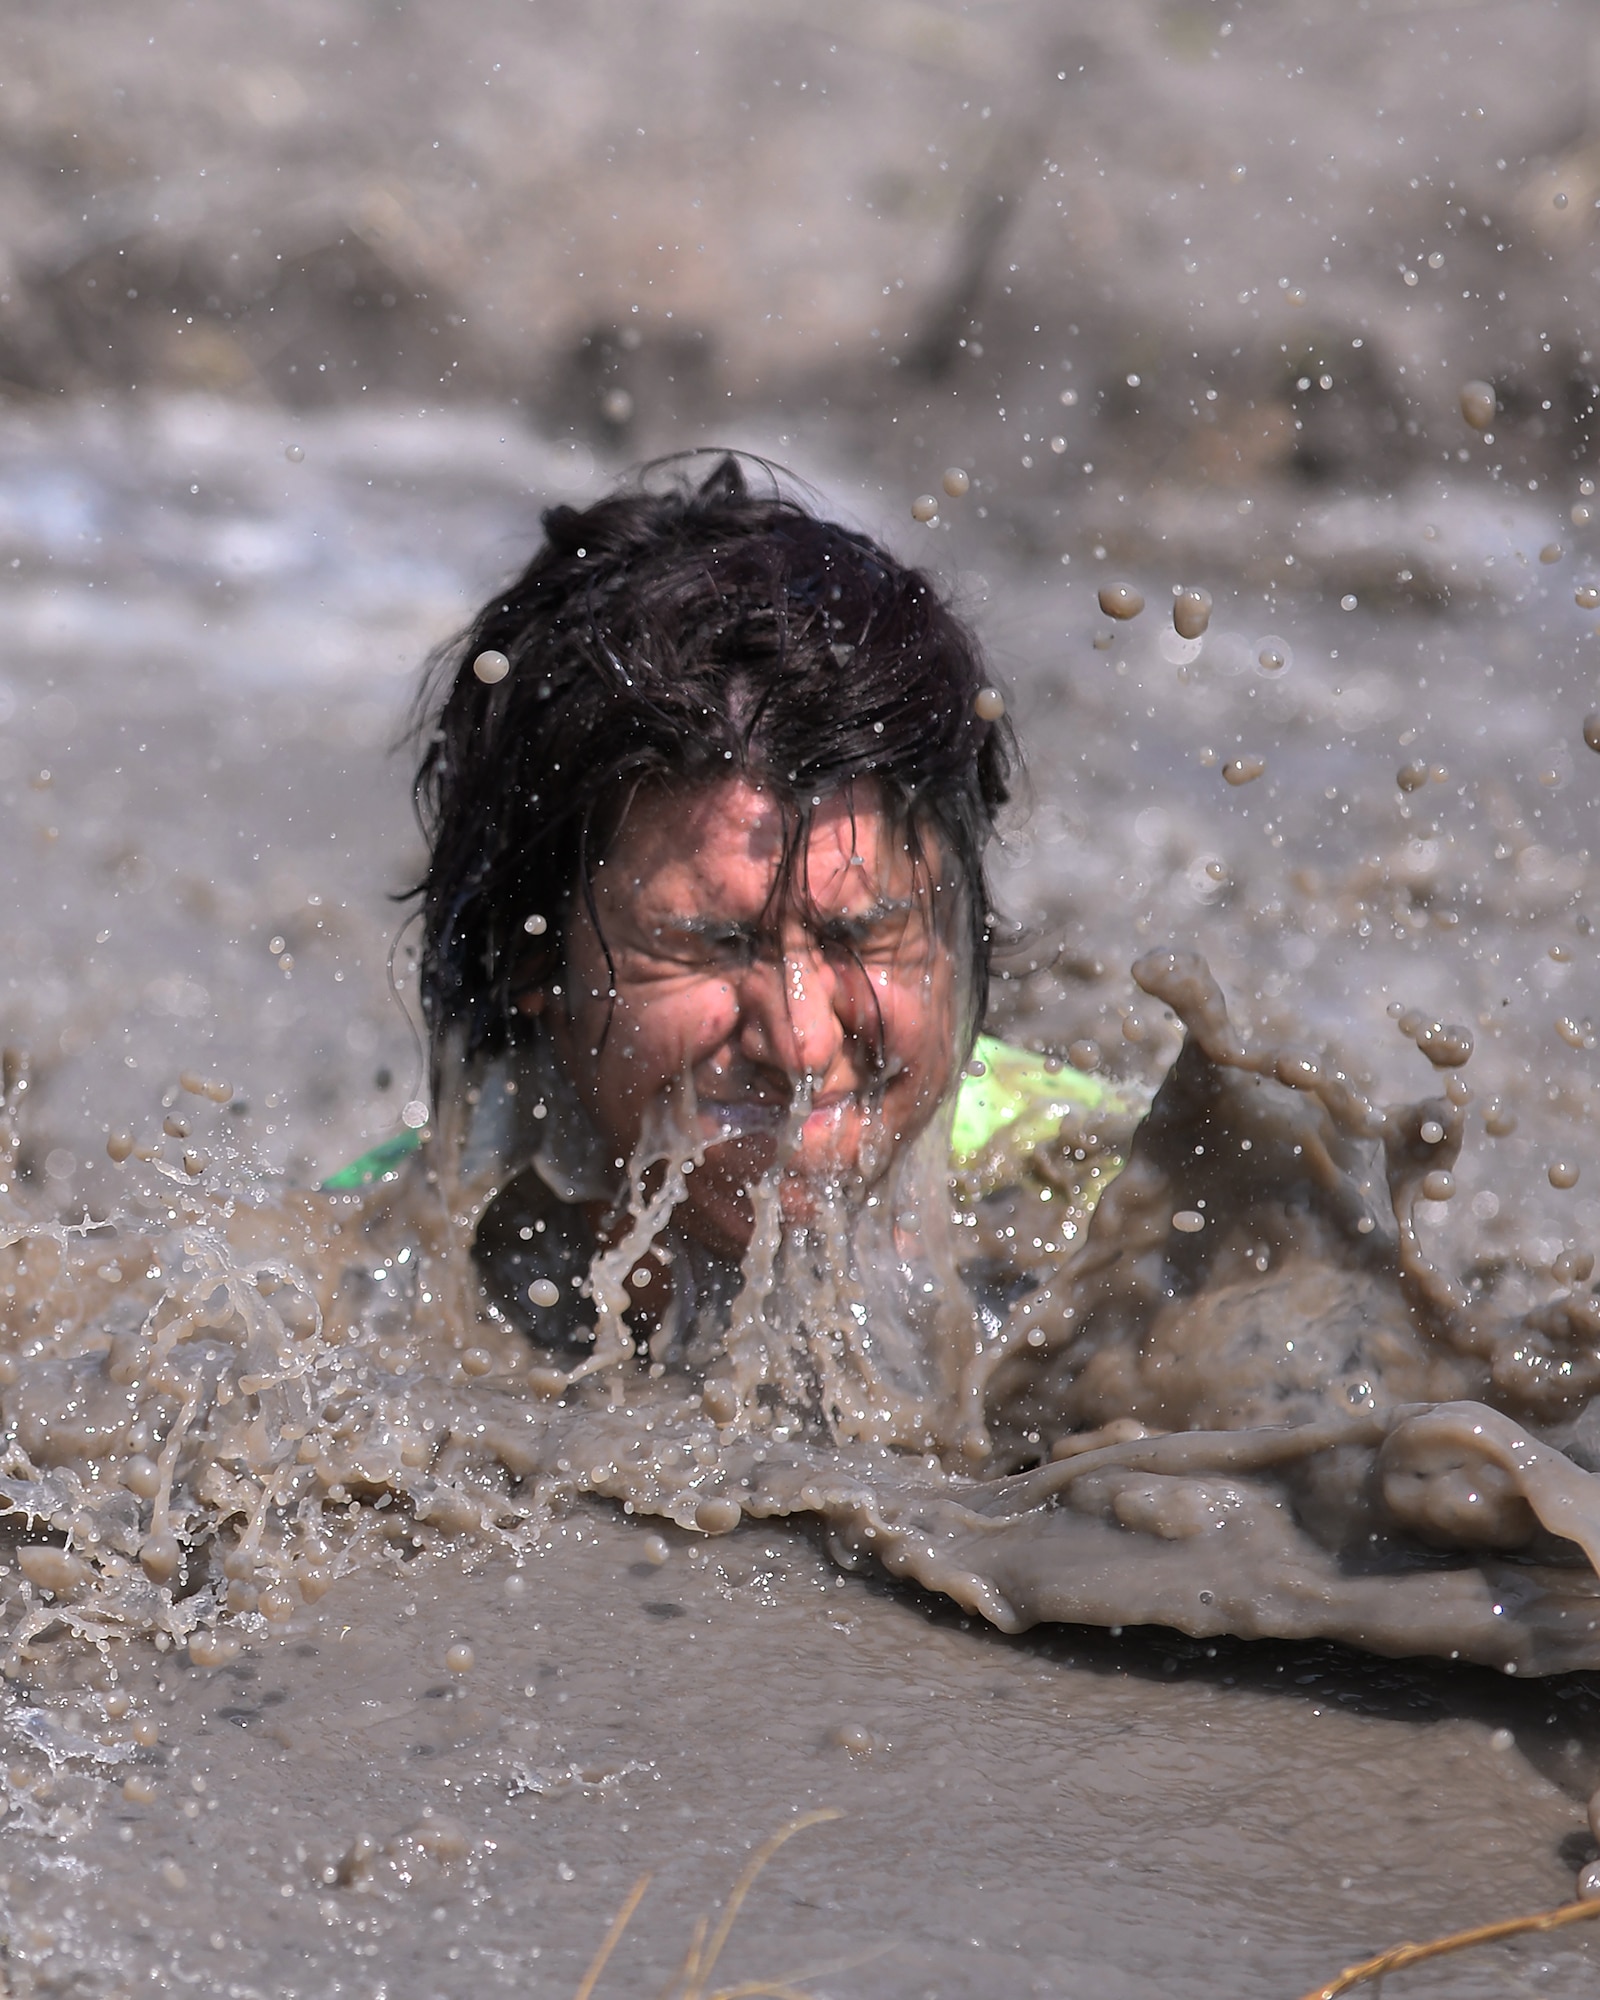 Jill Randall, 90th Missile Wing Sexual Assault Response coordinator, emerges from muddy water Aug. 29, 2015, after falling during one of the obstacles of the second annual F.E. Warren Air Force Base, Wyo., mud run. Most of the five-kilometer course was located on the 90th Civil Engineer Squadron’s training yard. (U.S. Air Force photo by Airman 1st Class Brandon Valle)